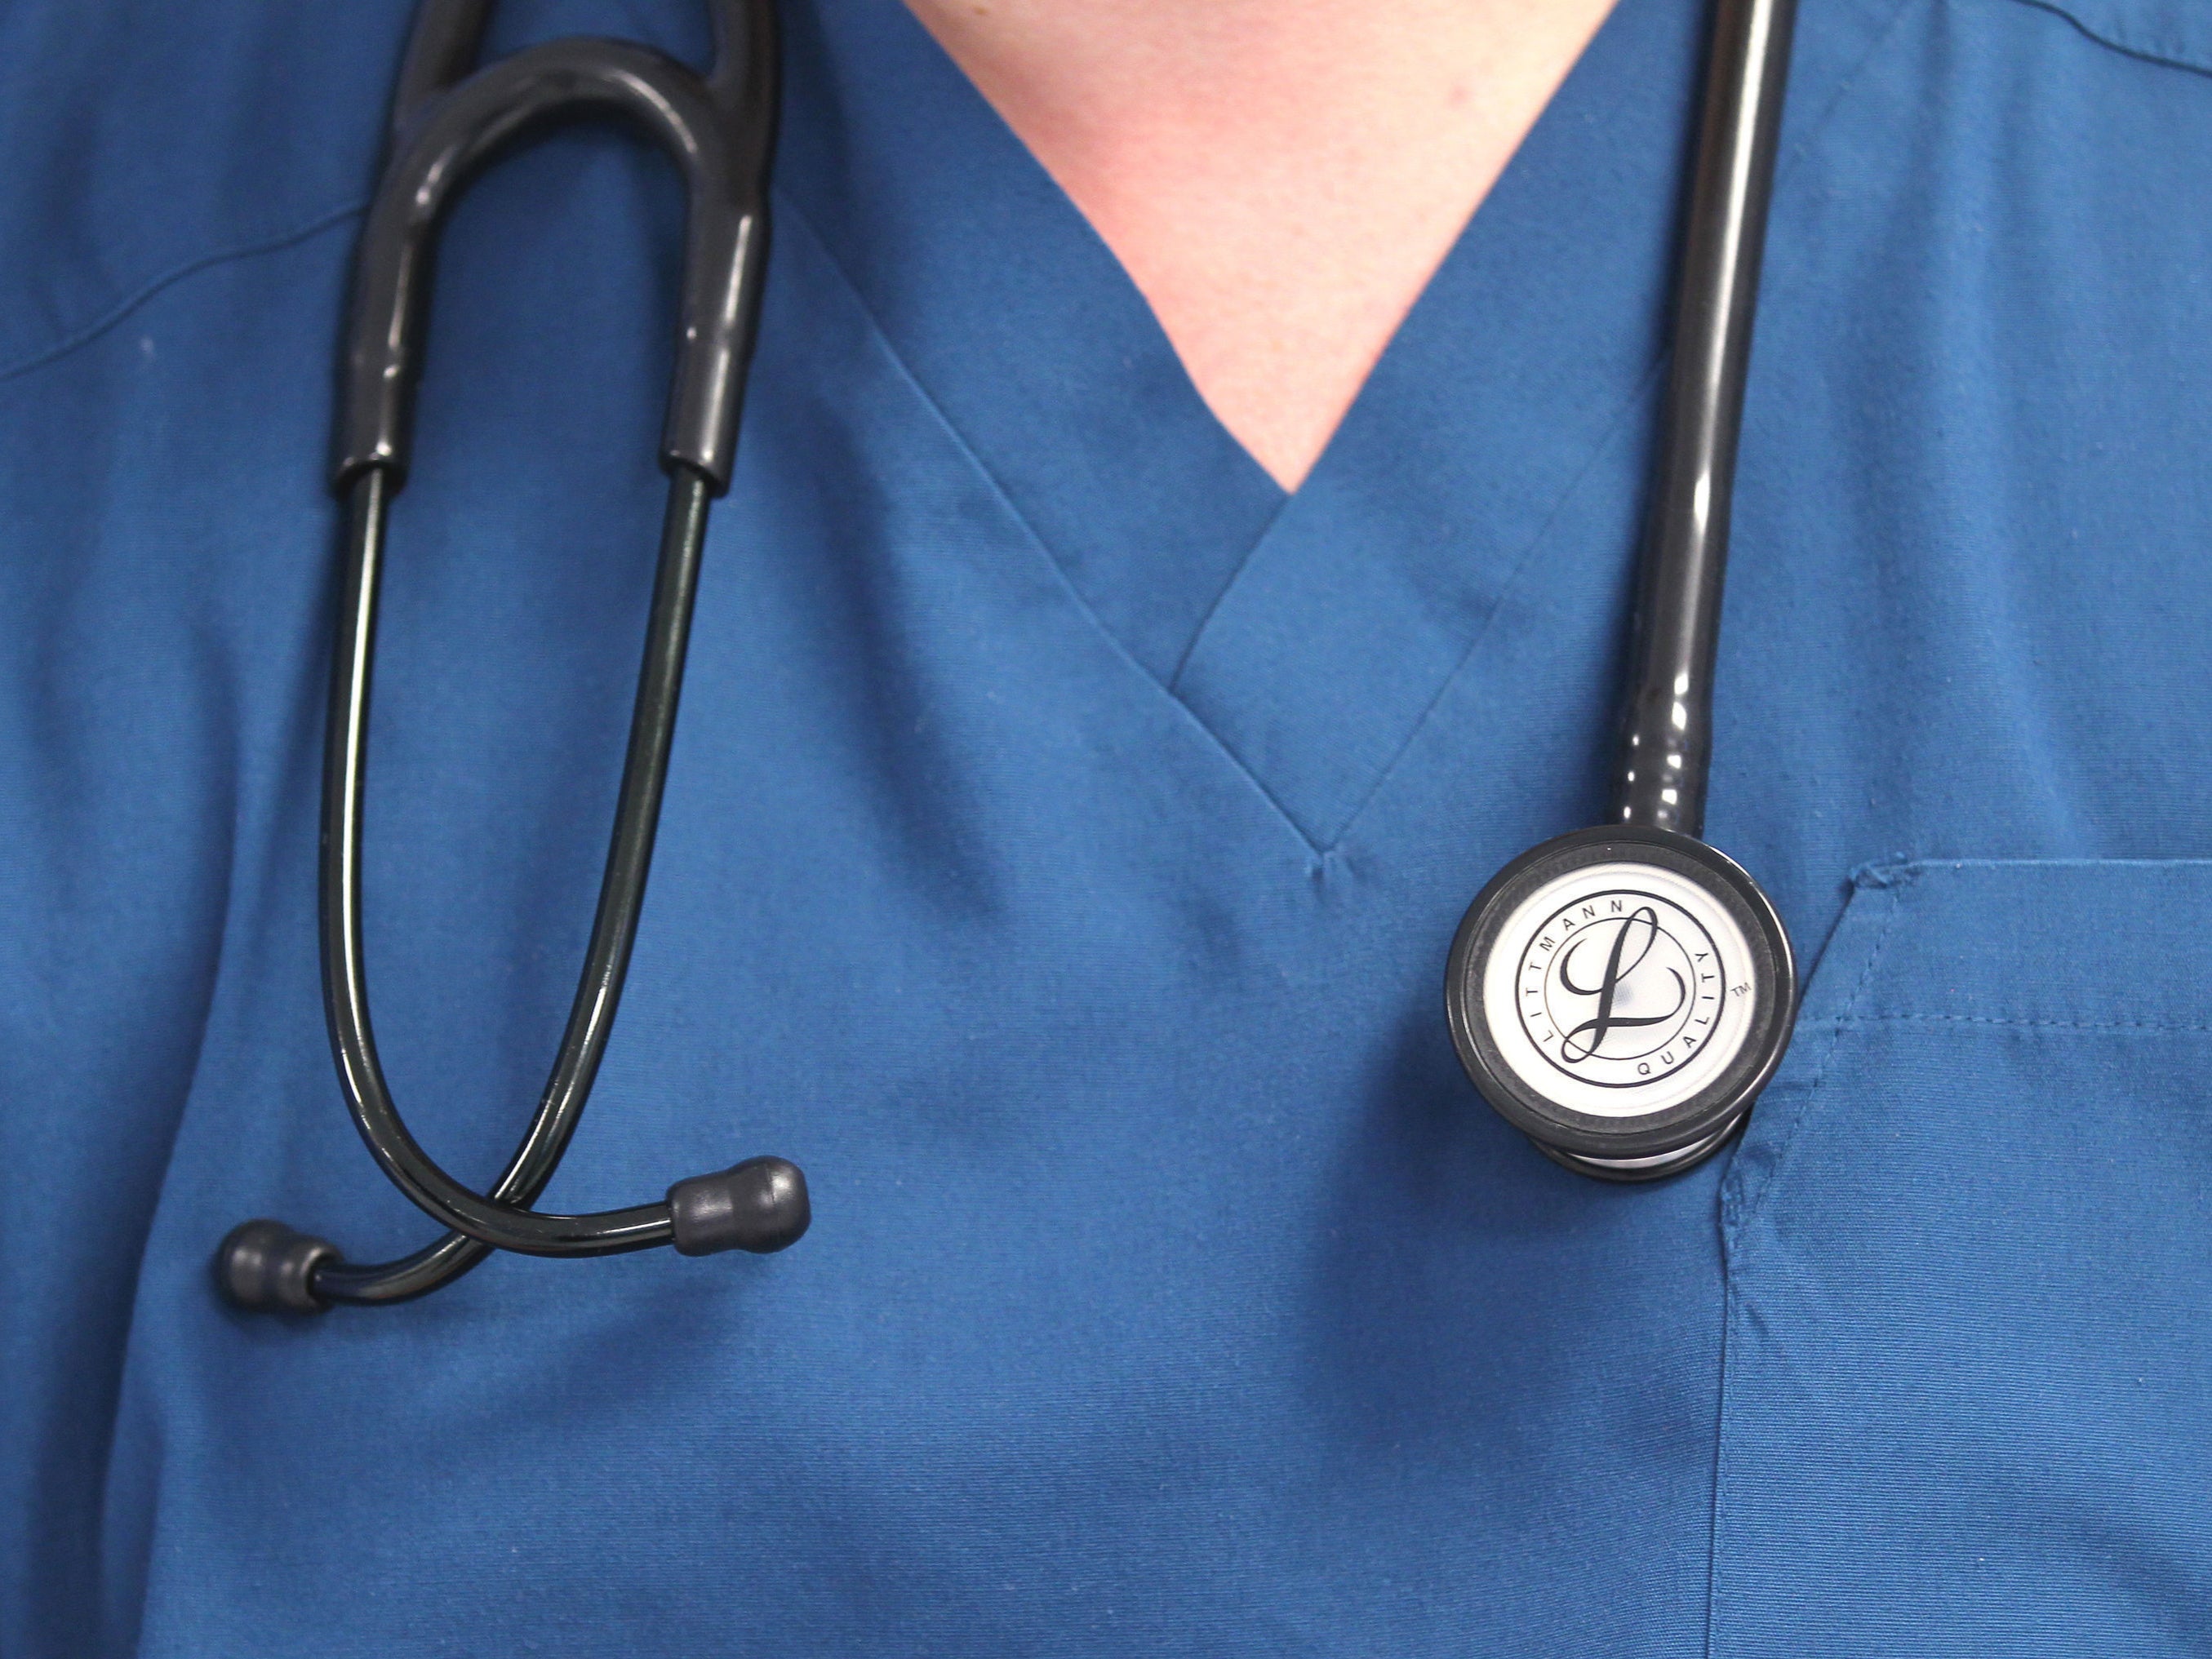 NHS workers have revealed staff shortages affect their treatment decisions